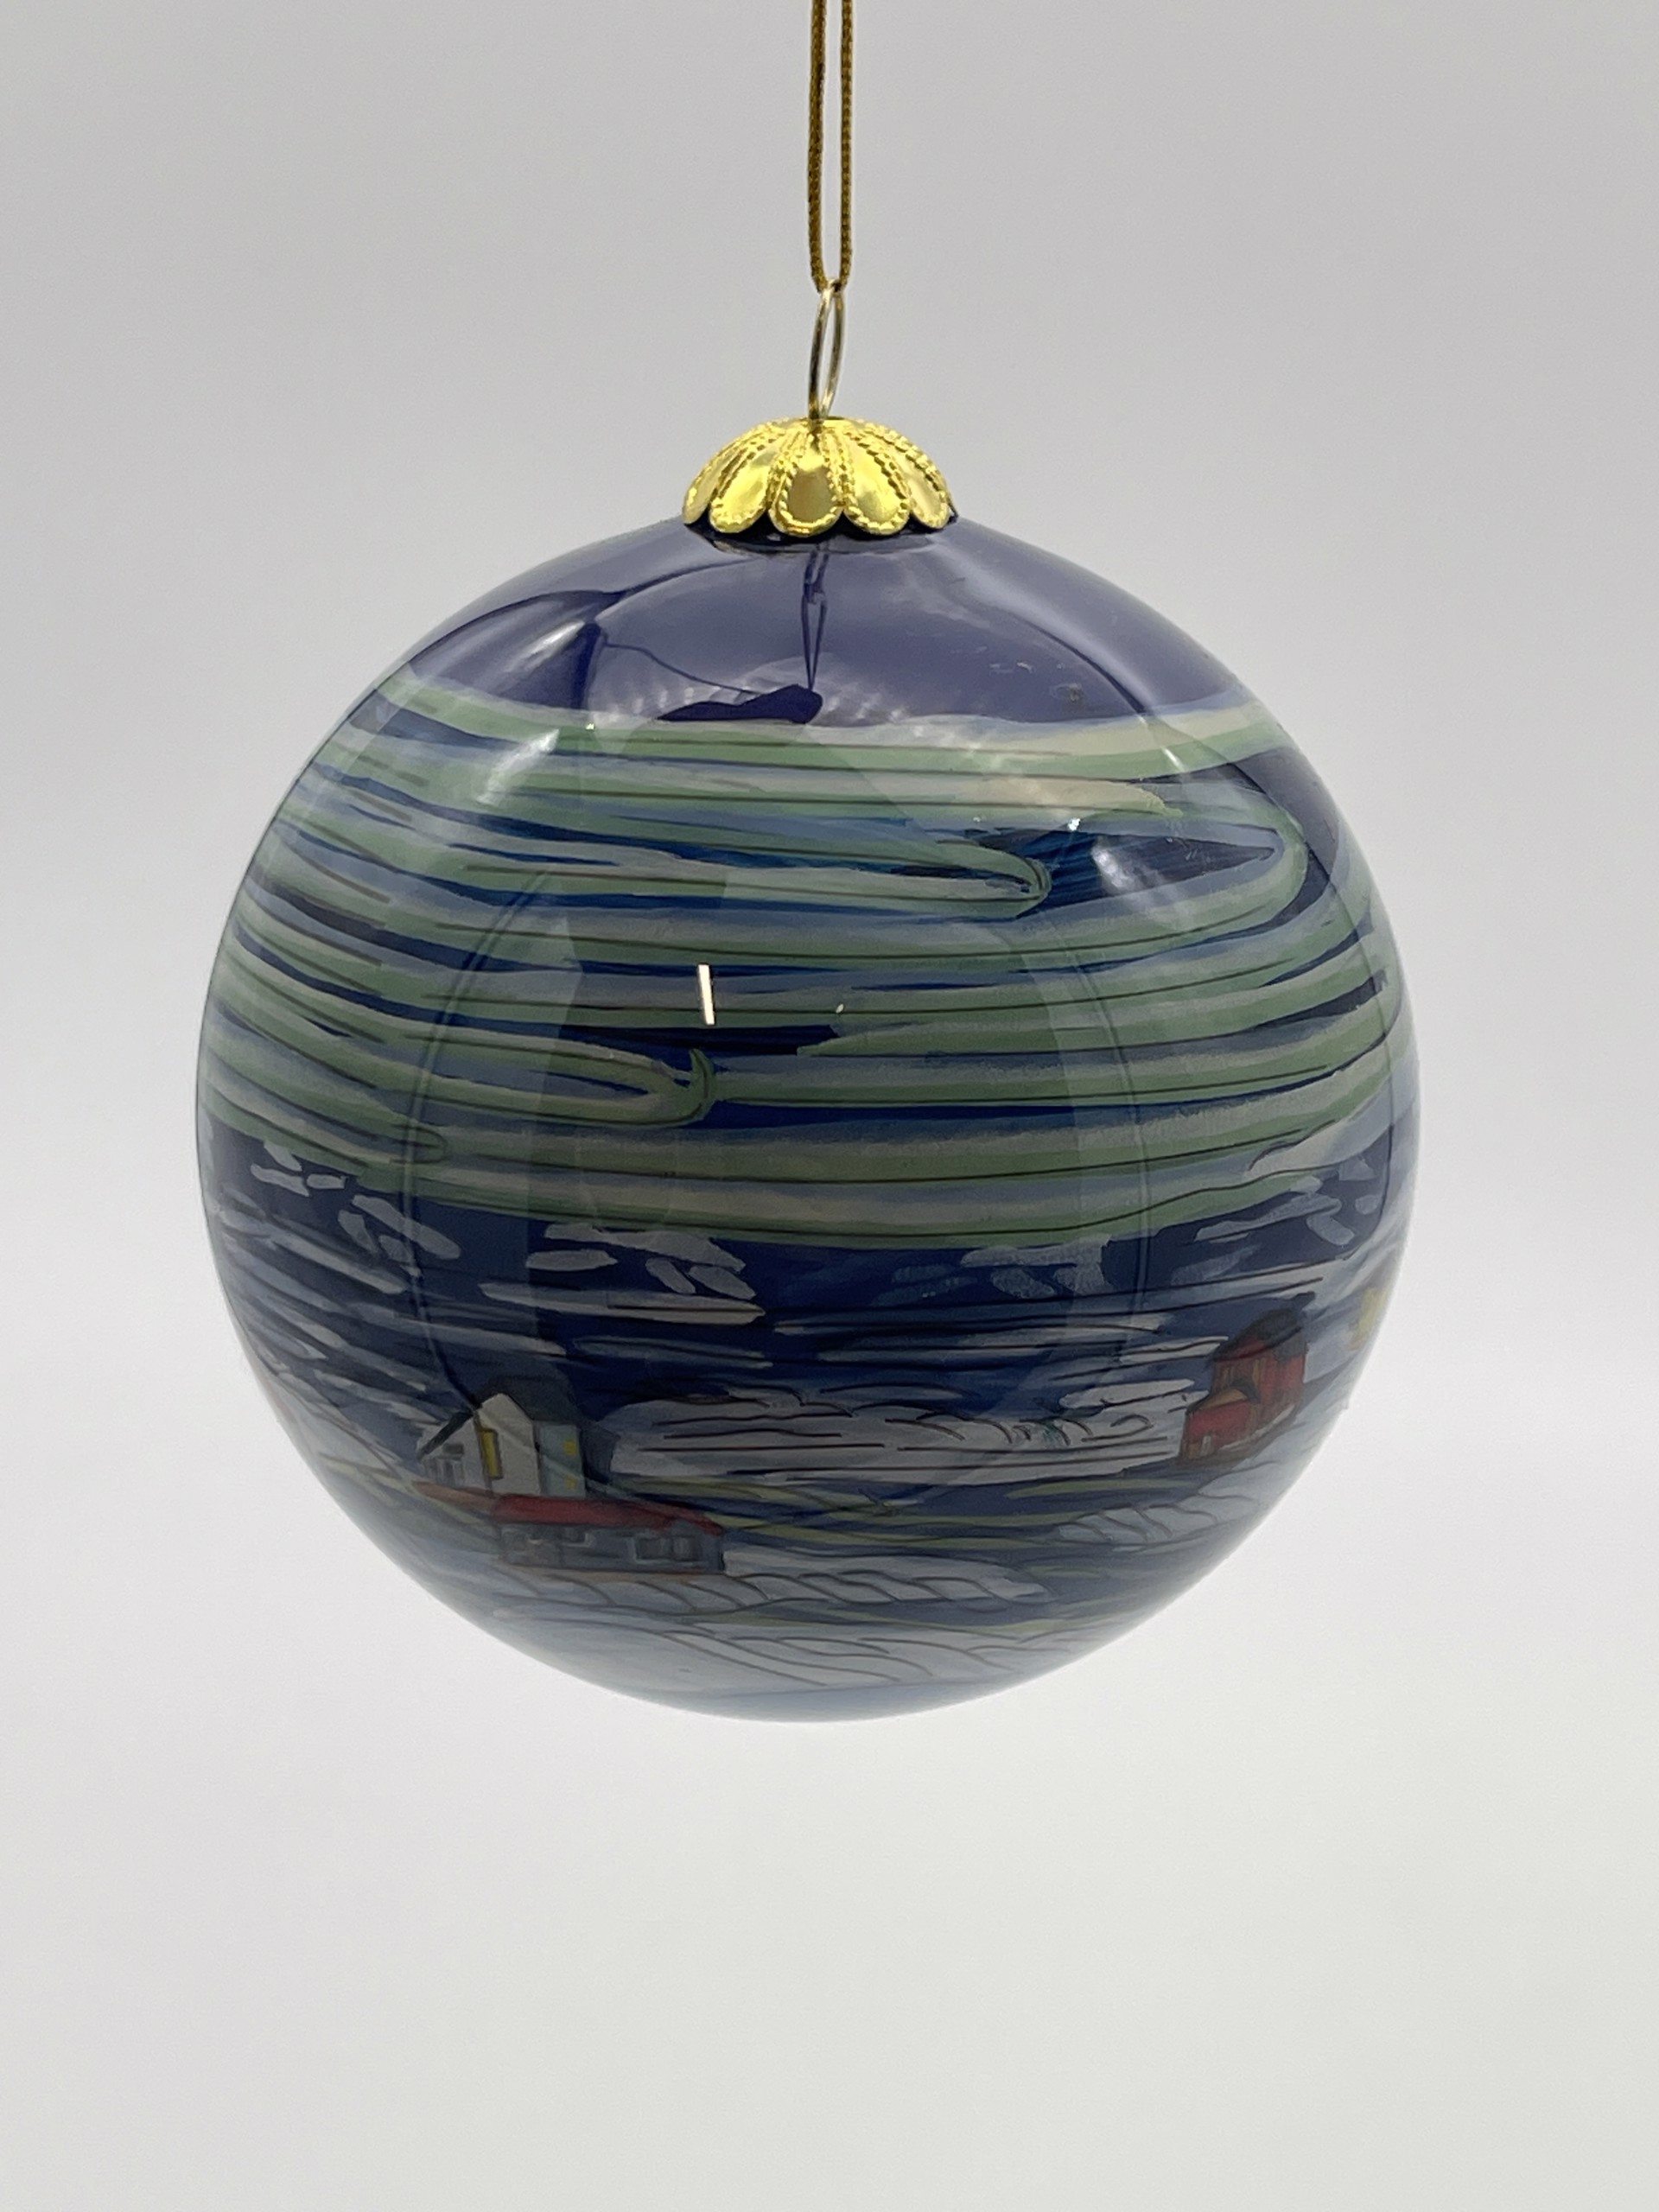 Yellowknife Houseboats Ornament by Robbie Craig